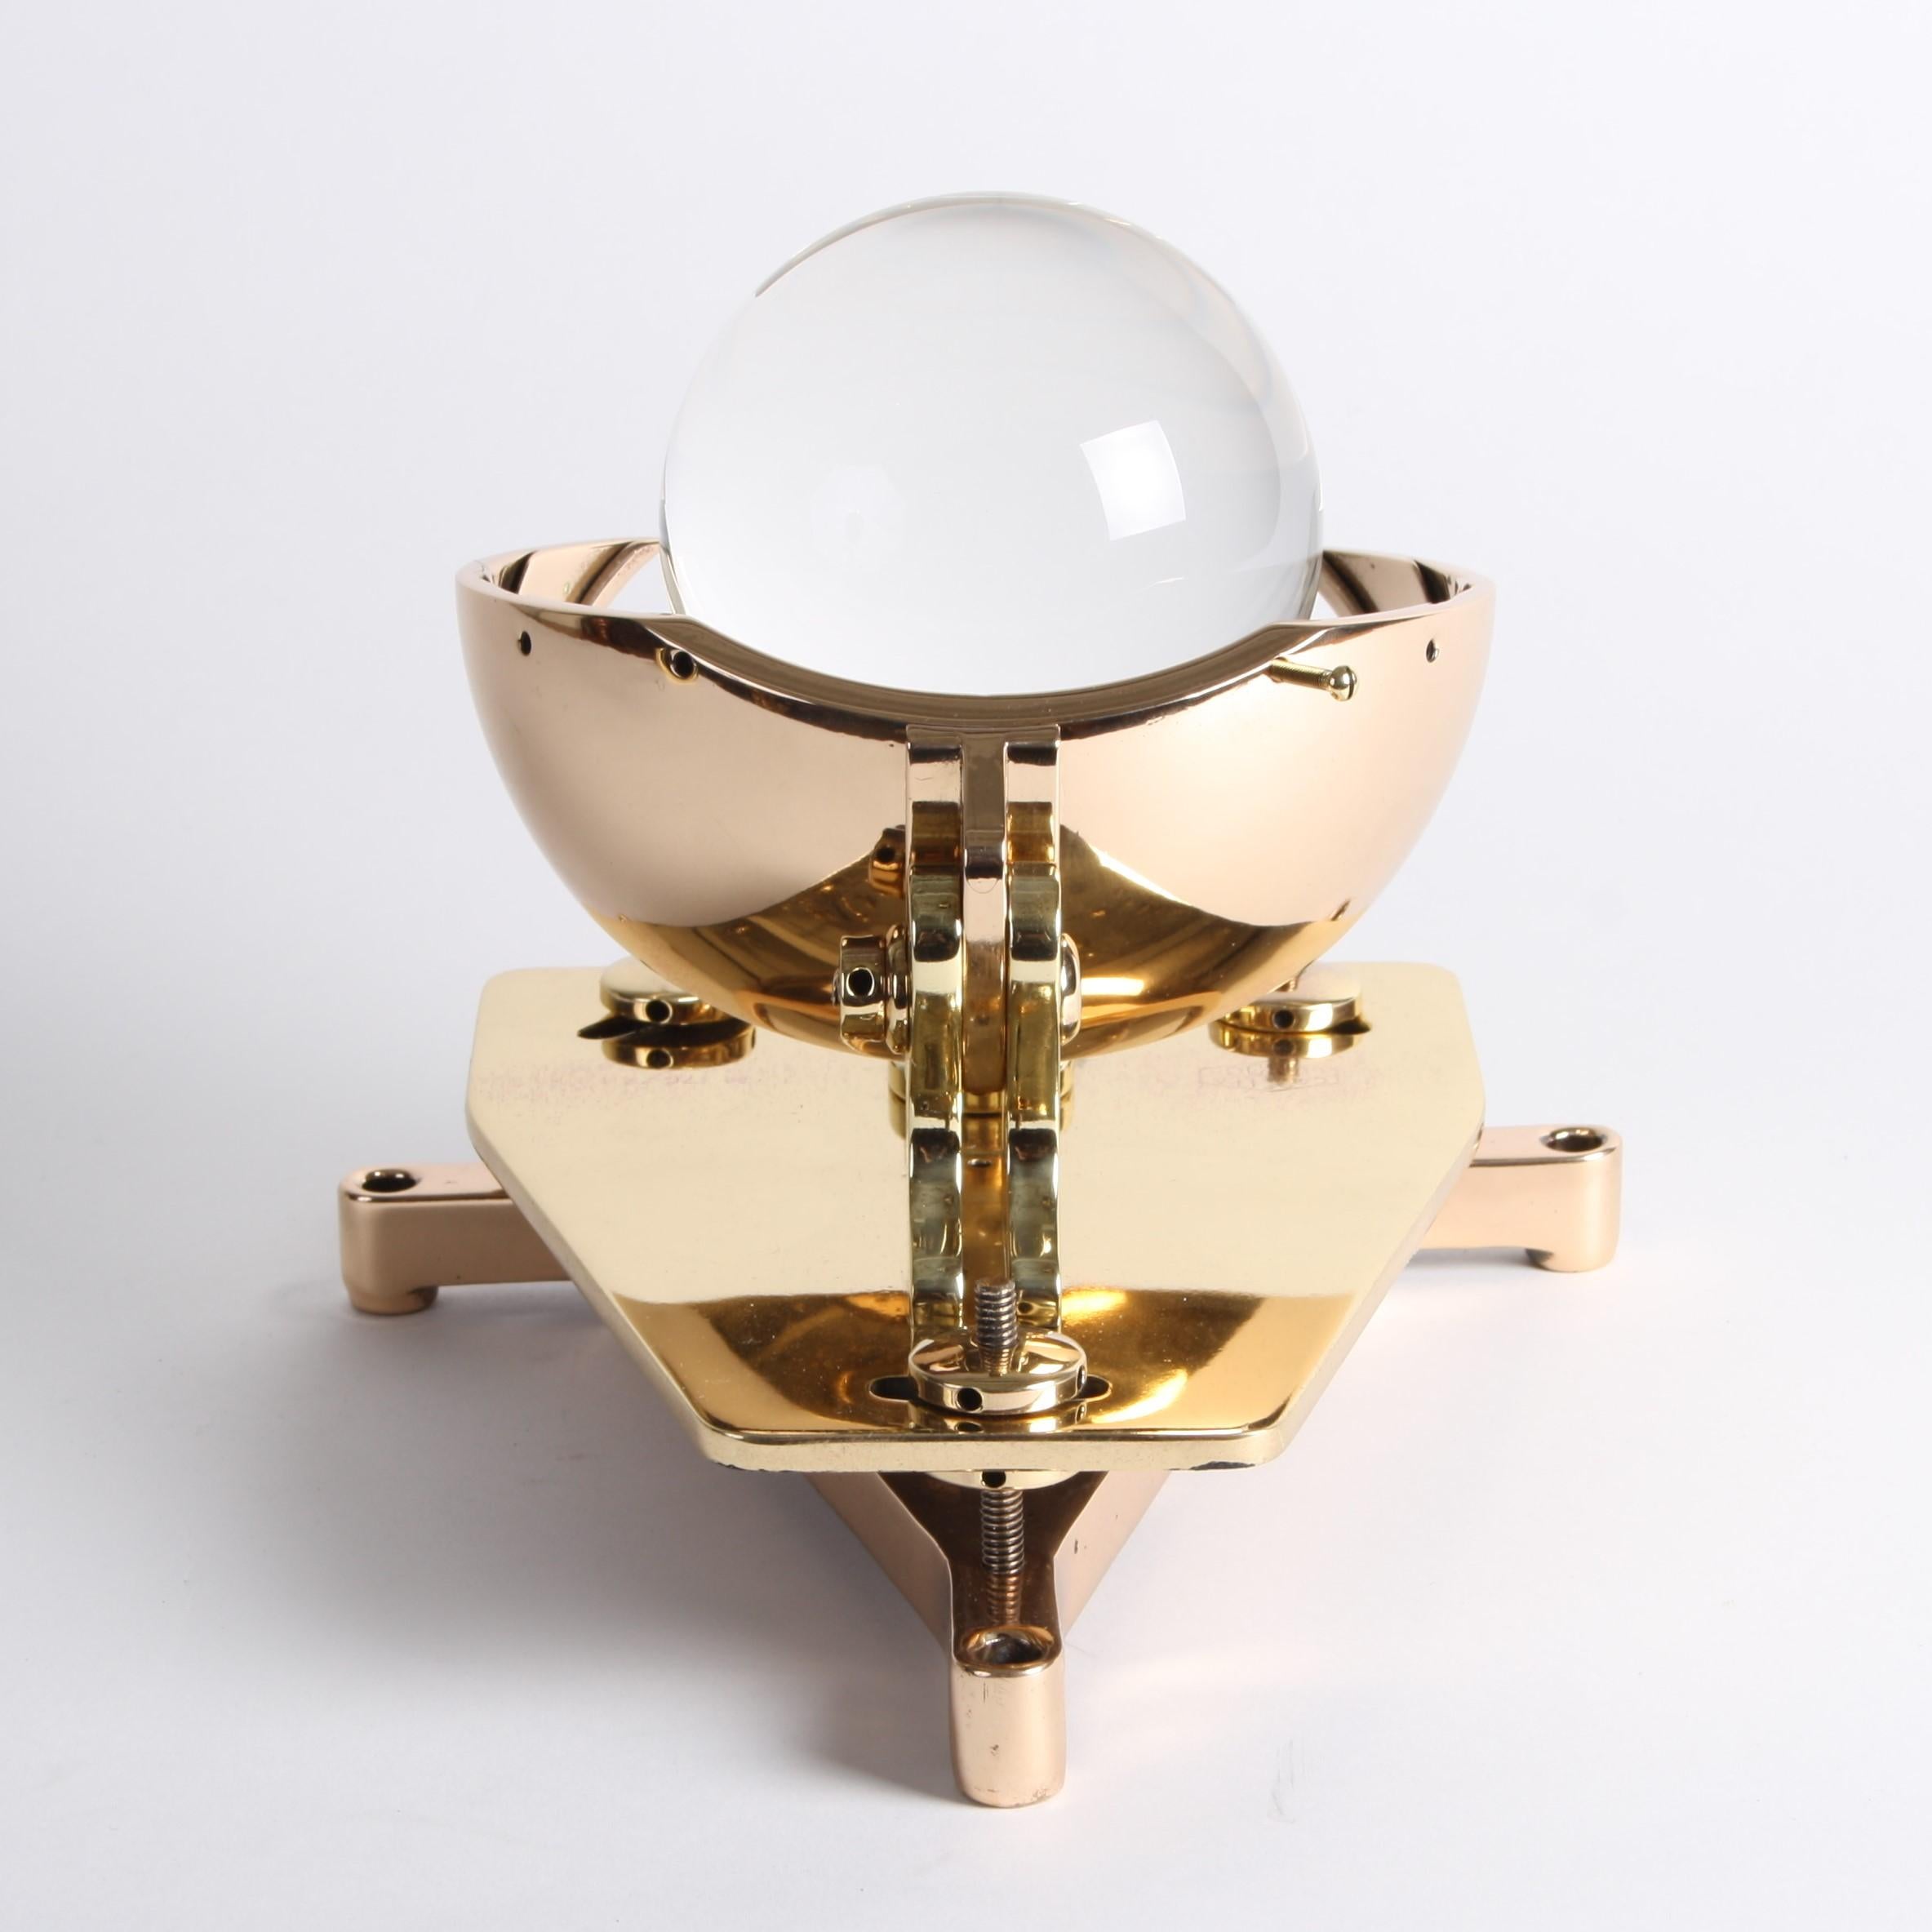 Campbell–Stokes Sphere Sunshine Recorder by Casella of London 1